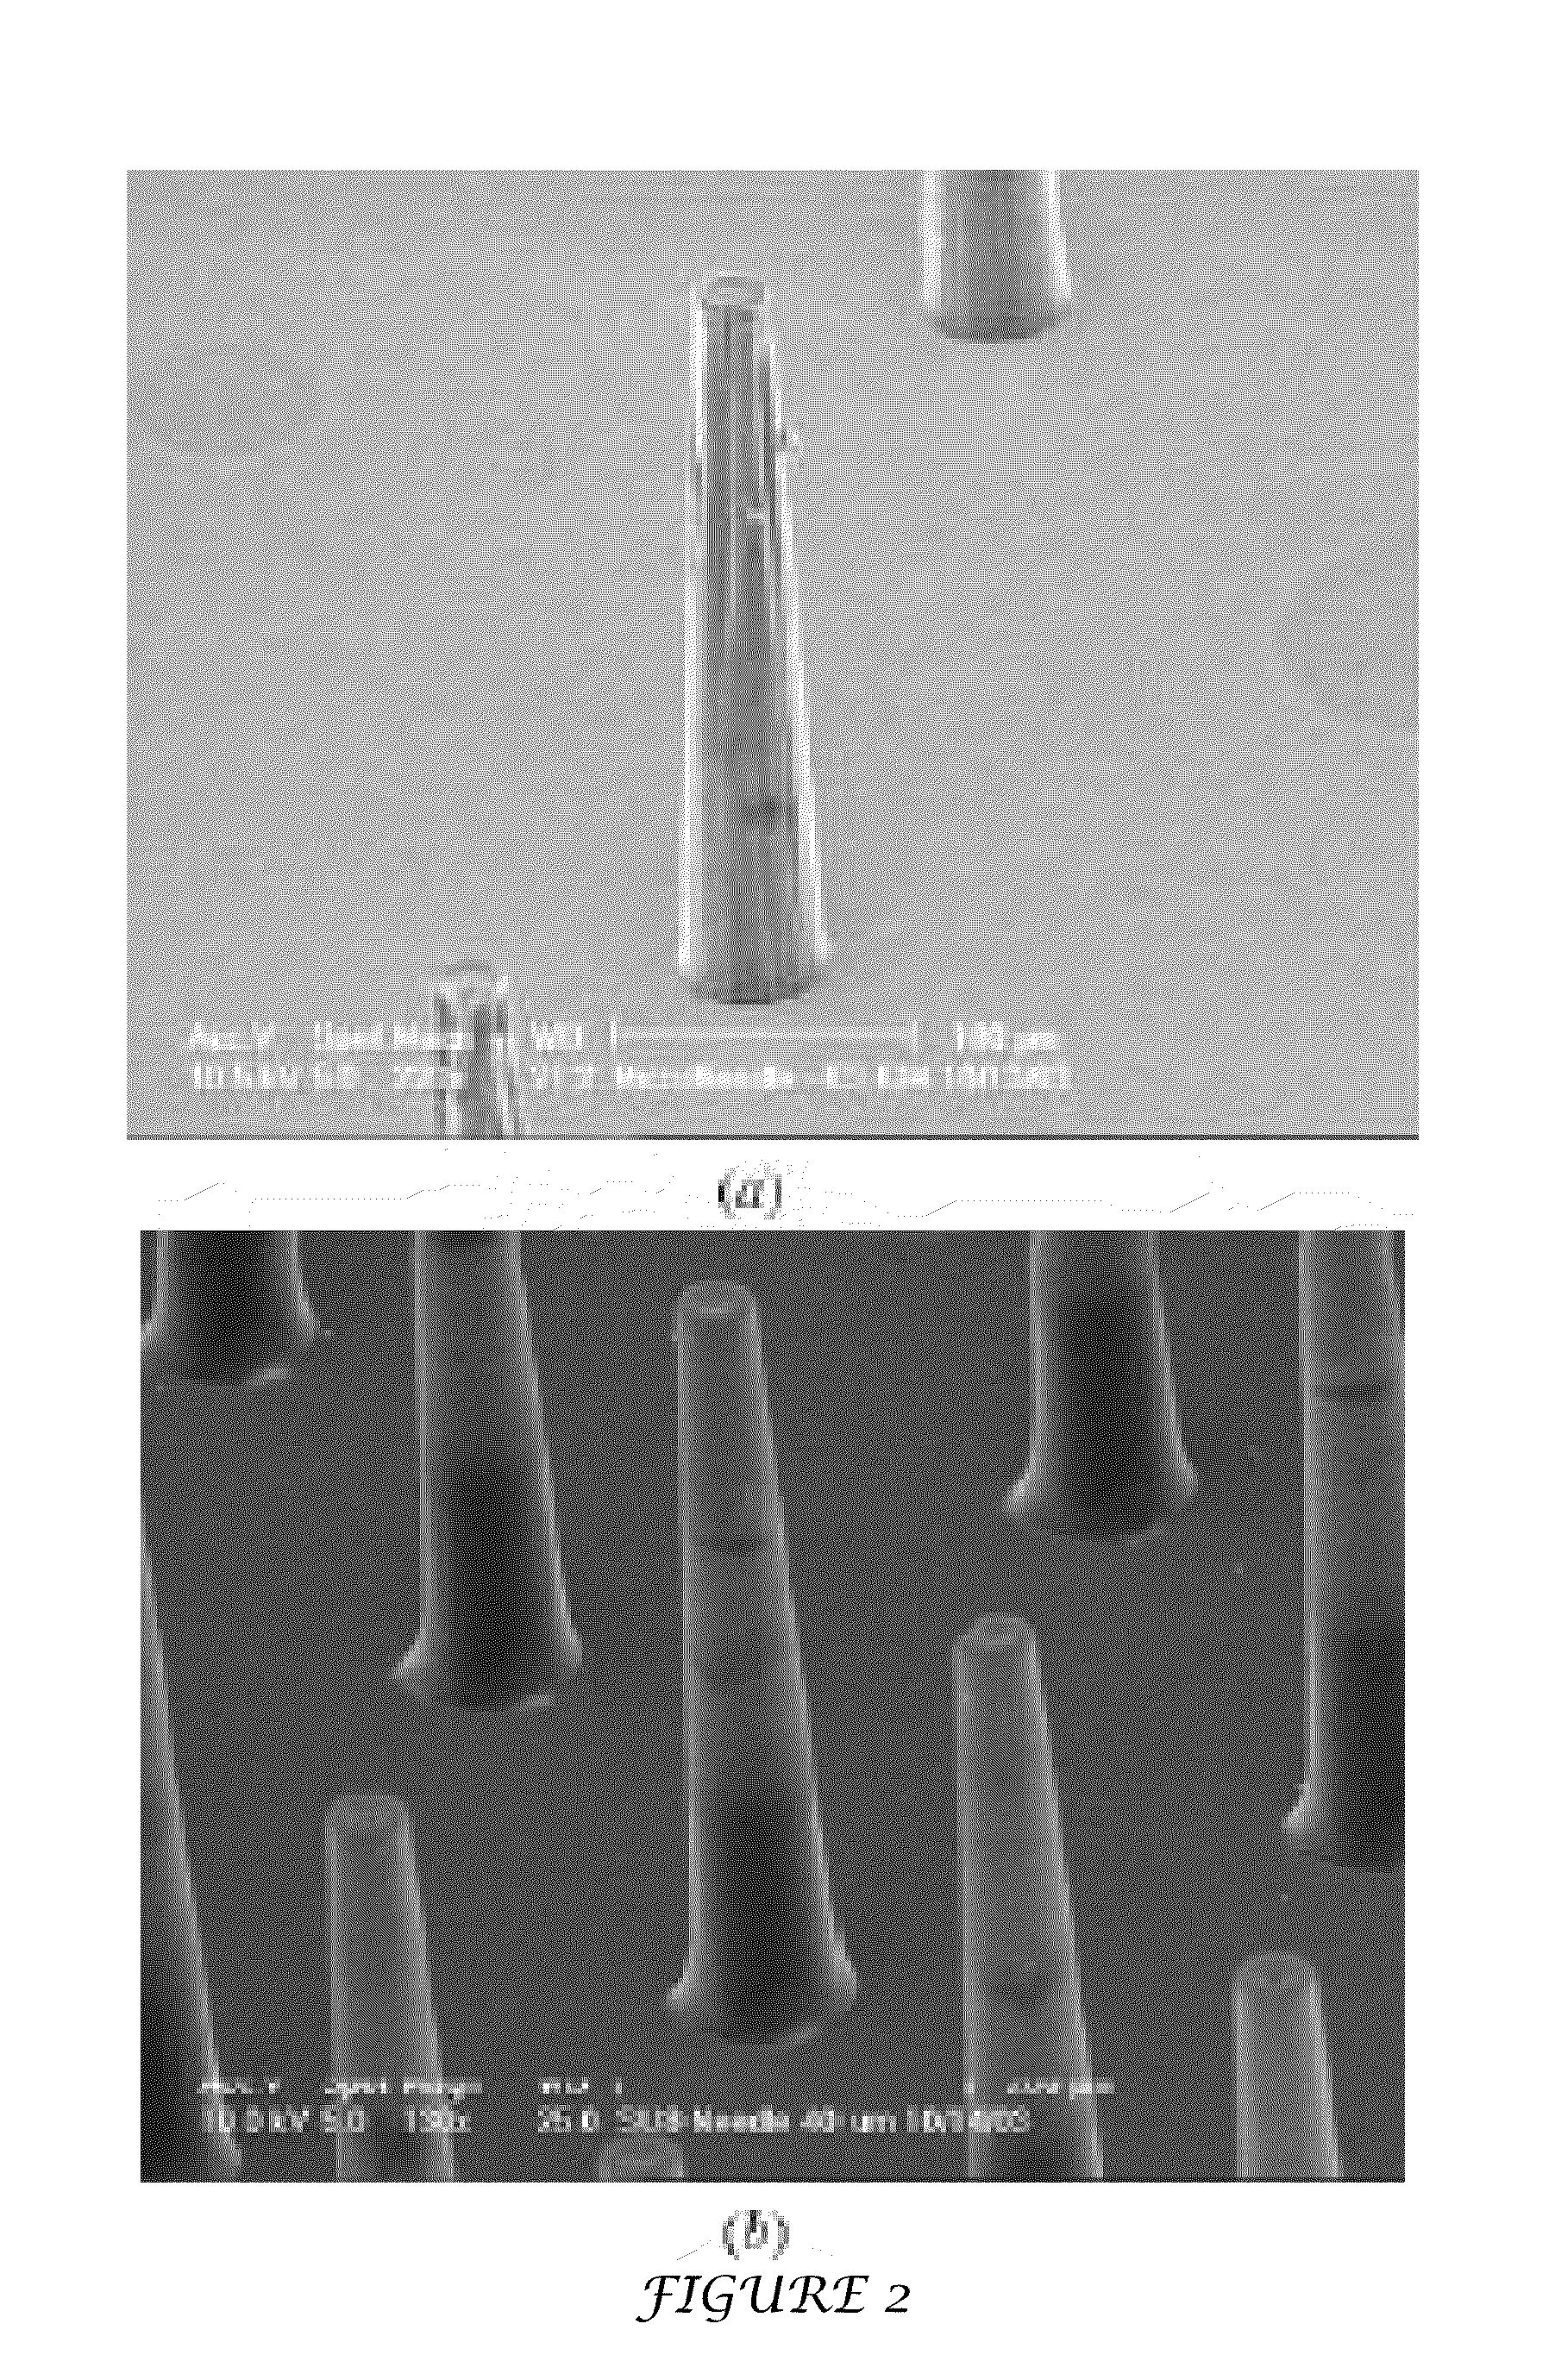 Tapered hollow metallic microneedle array assembly and method of making and using the same